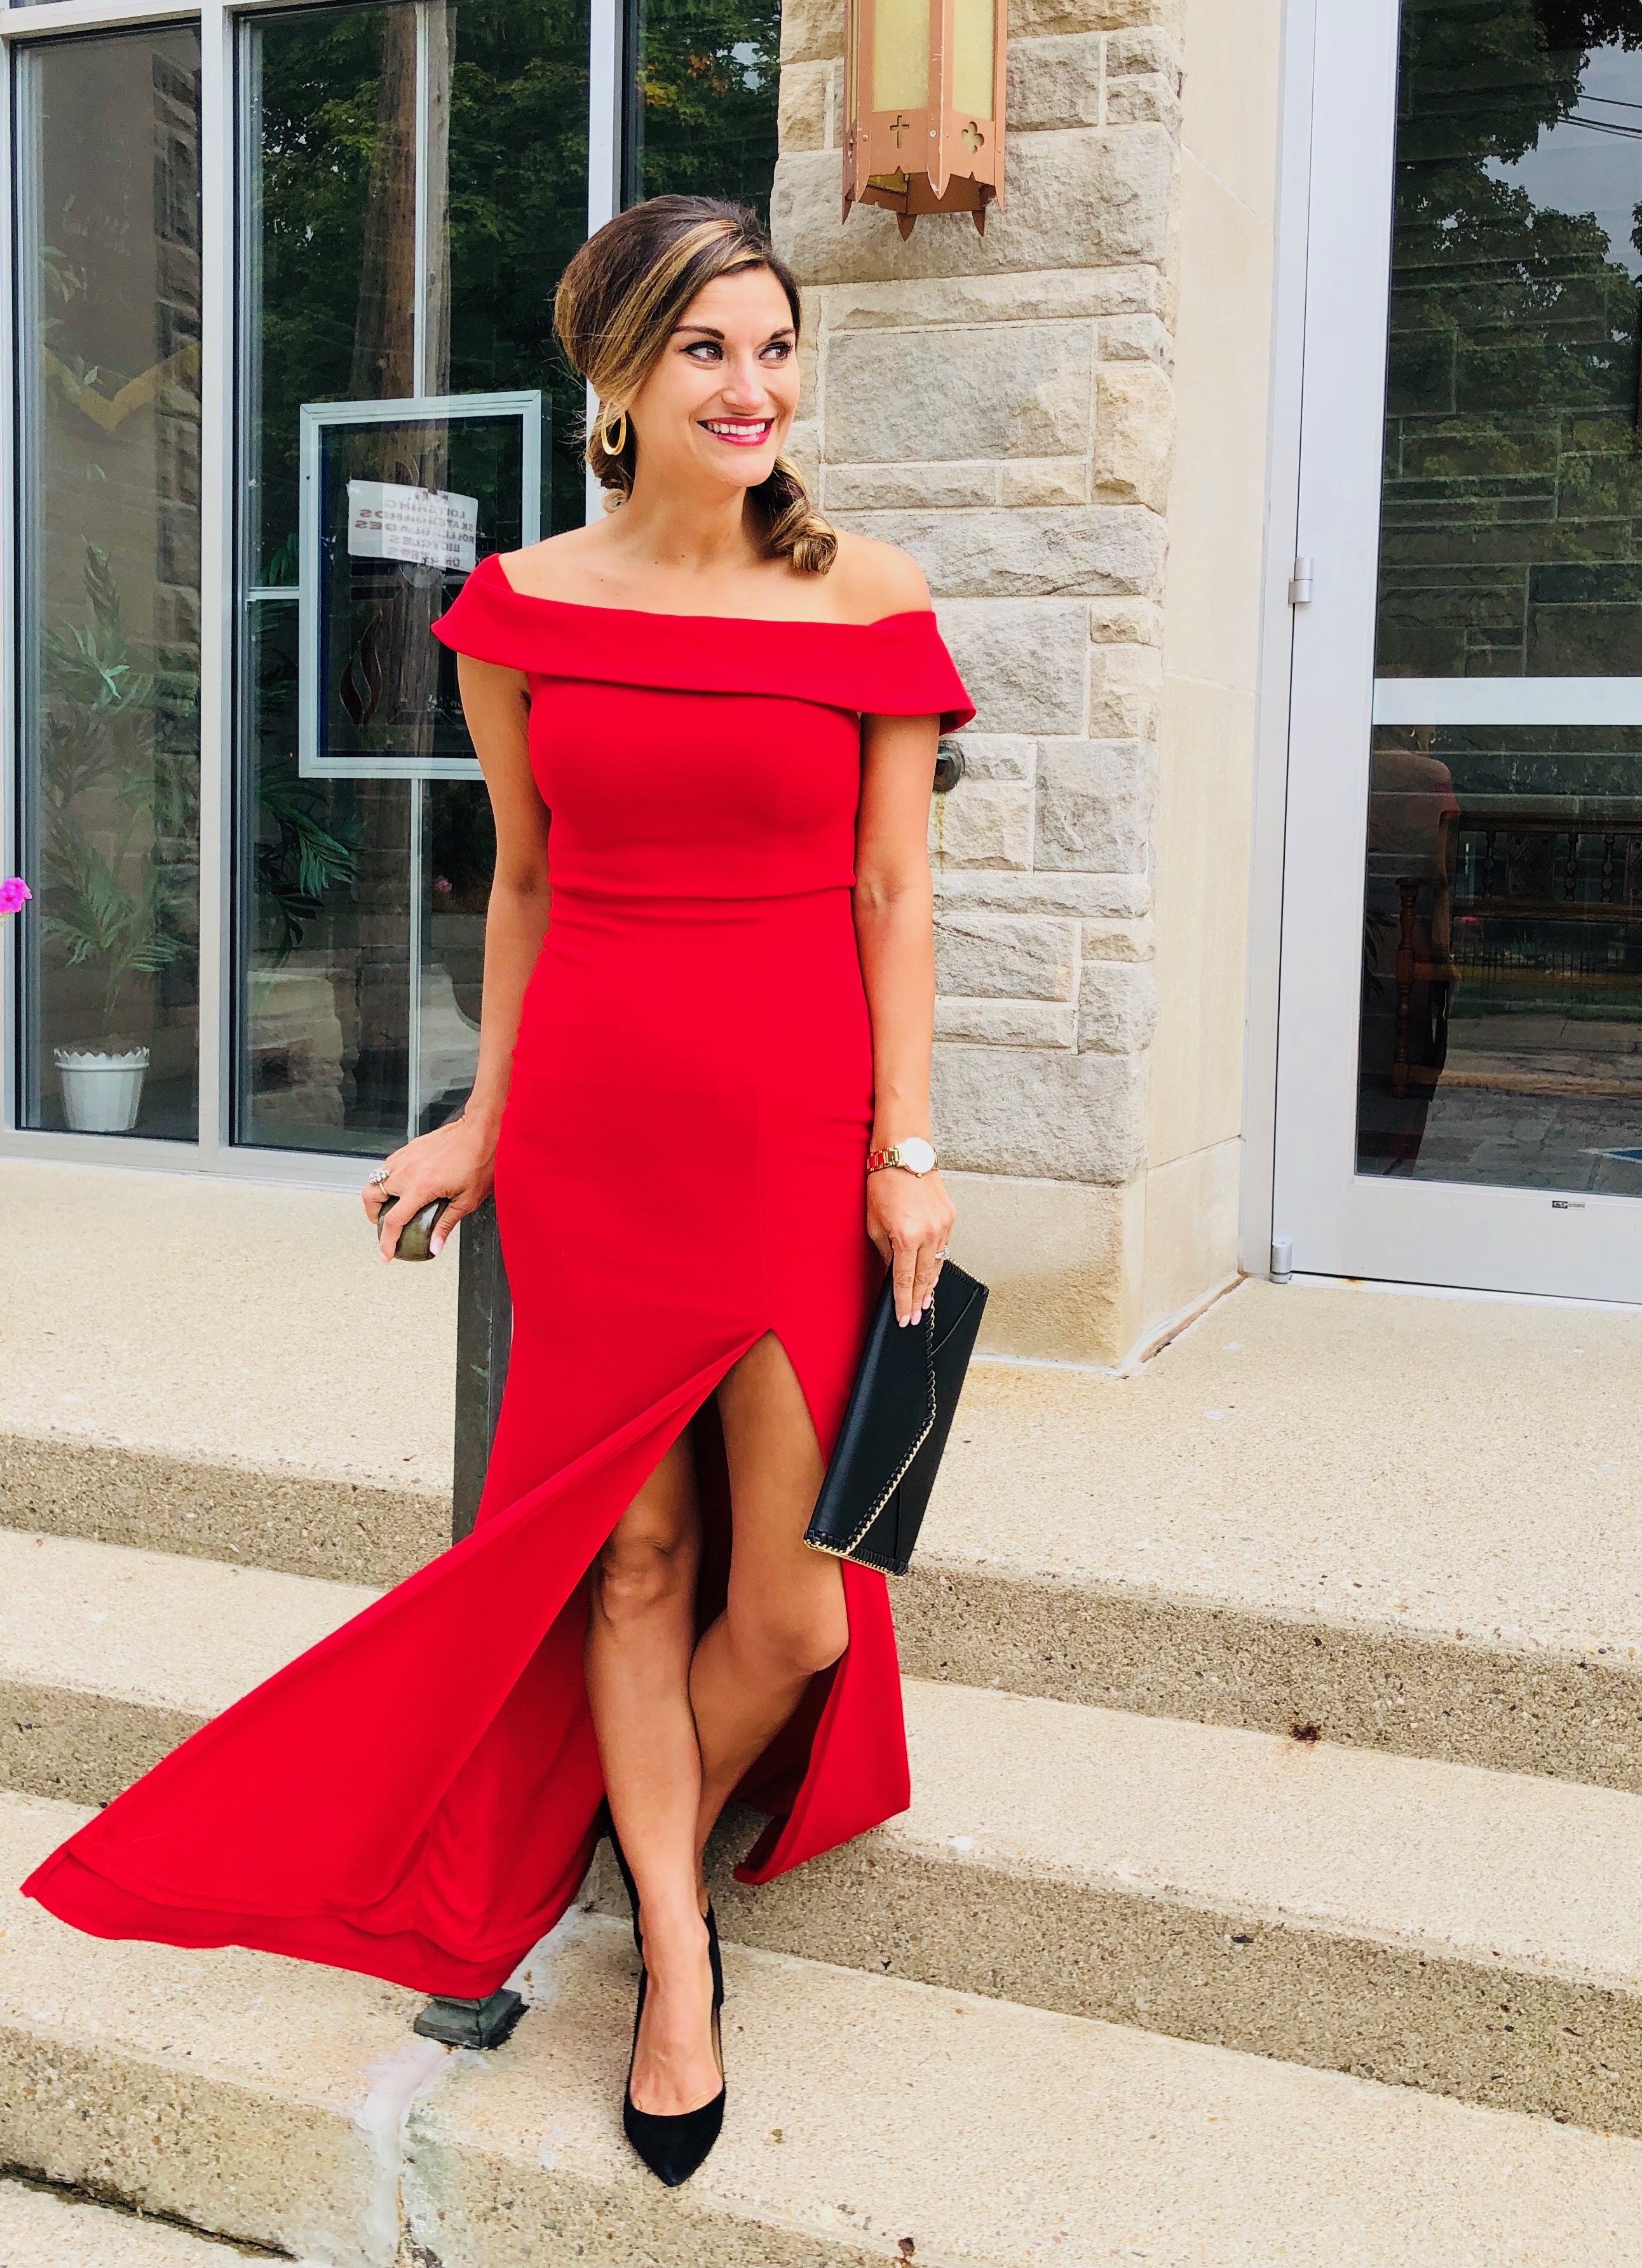 Getting Ready for the 2019 Wedding Season with Nordstrom - Dress